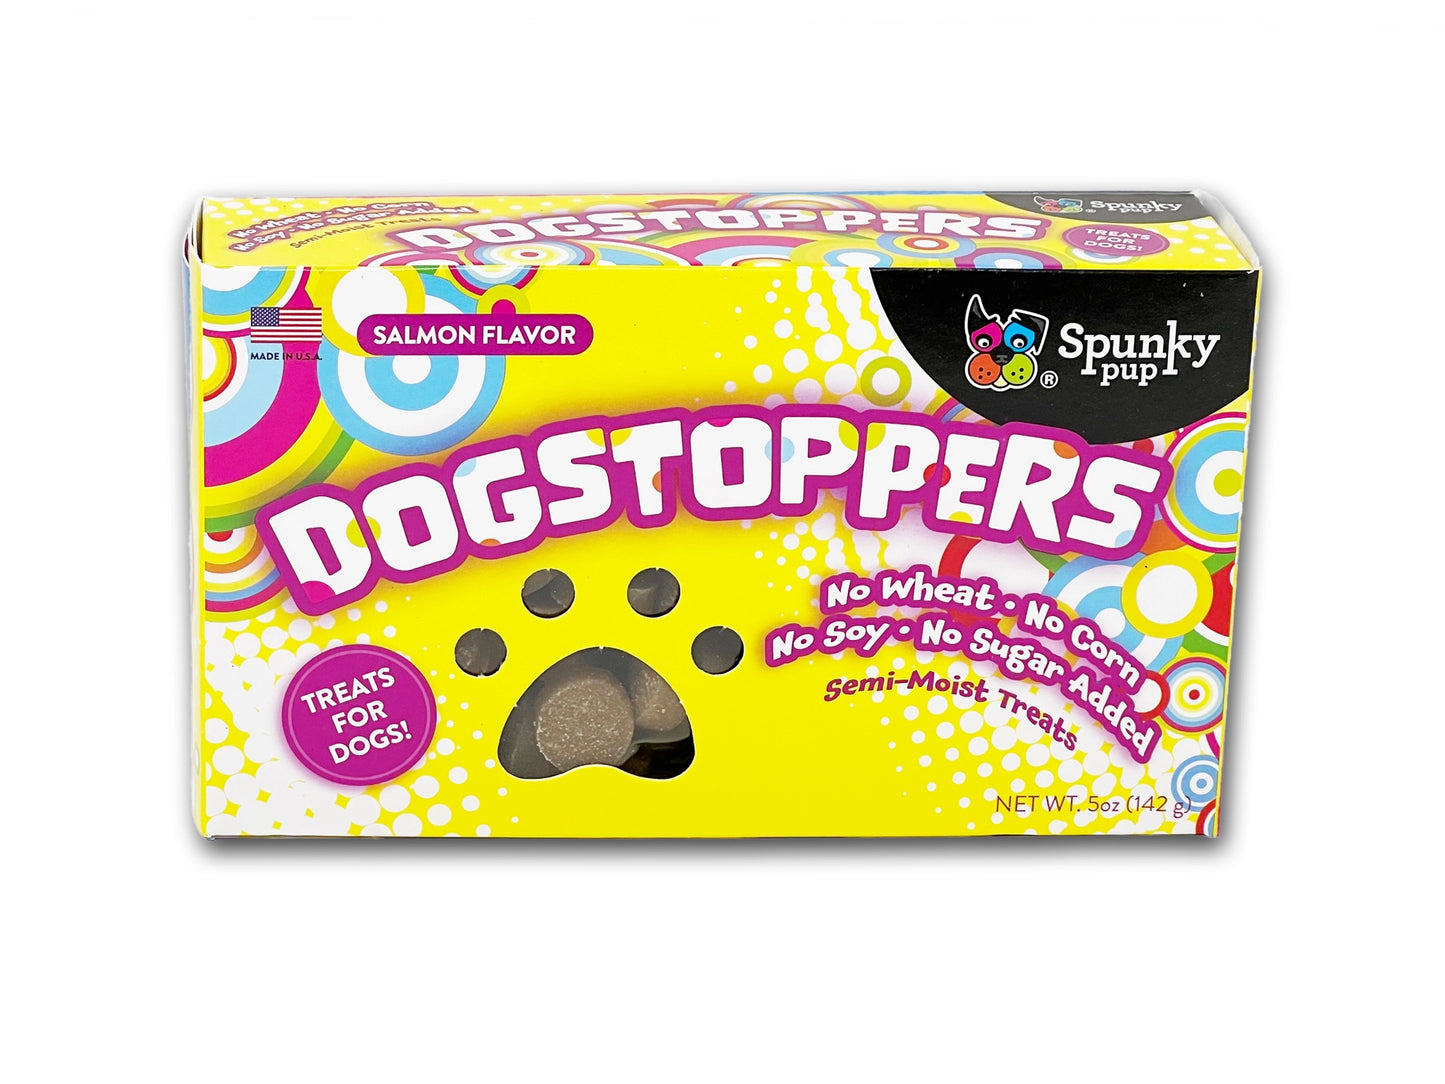 Boxed Candy Dog Treats | Dogstoppers